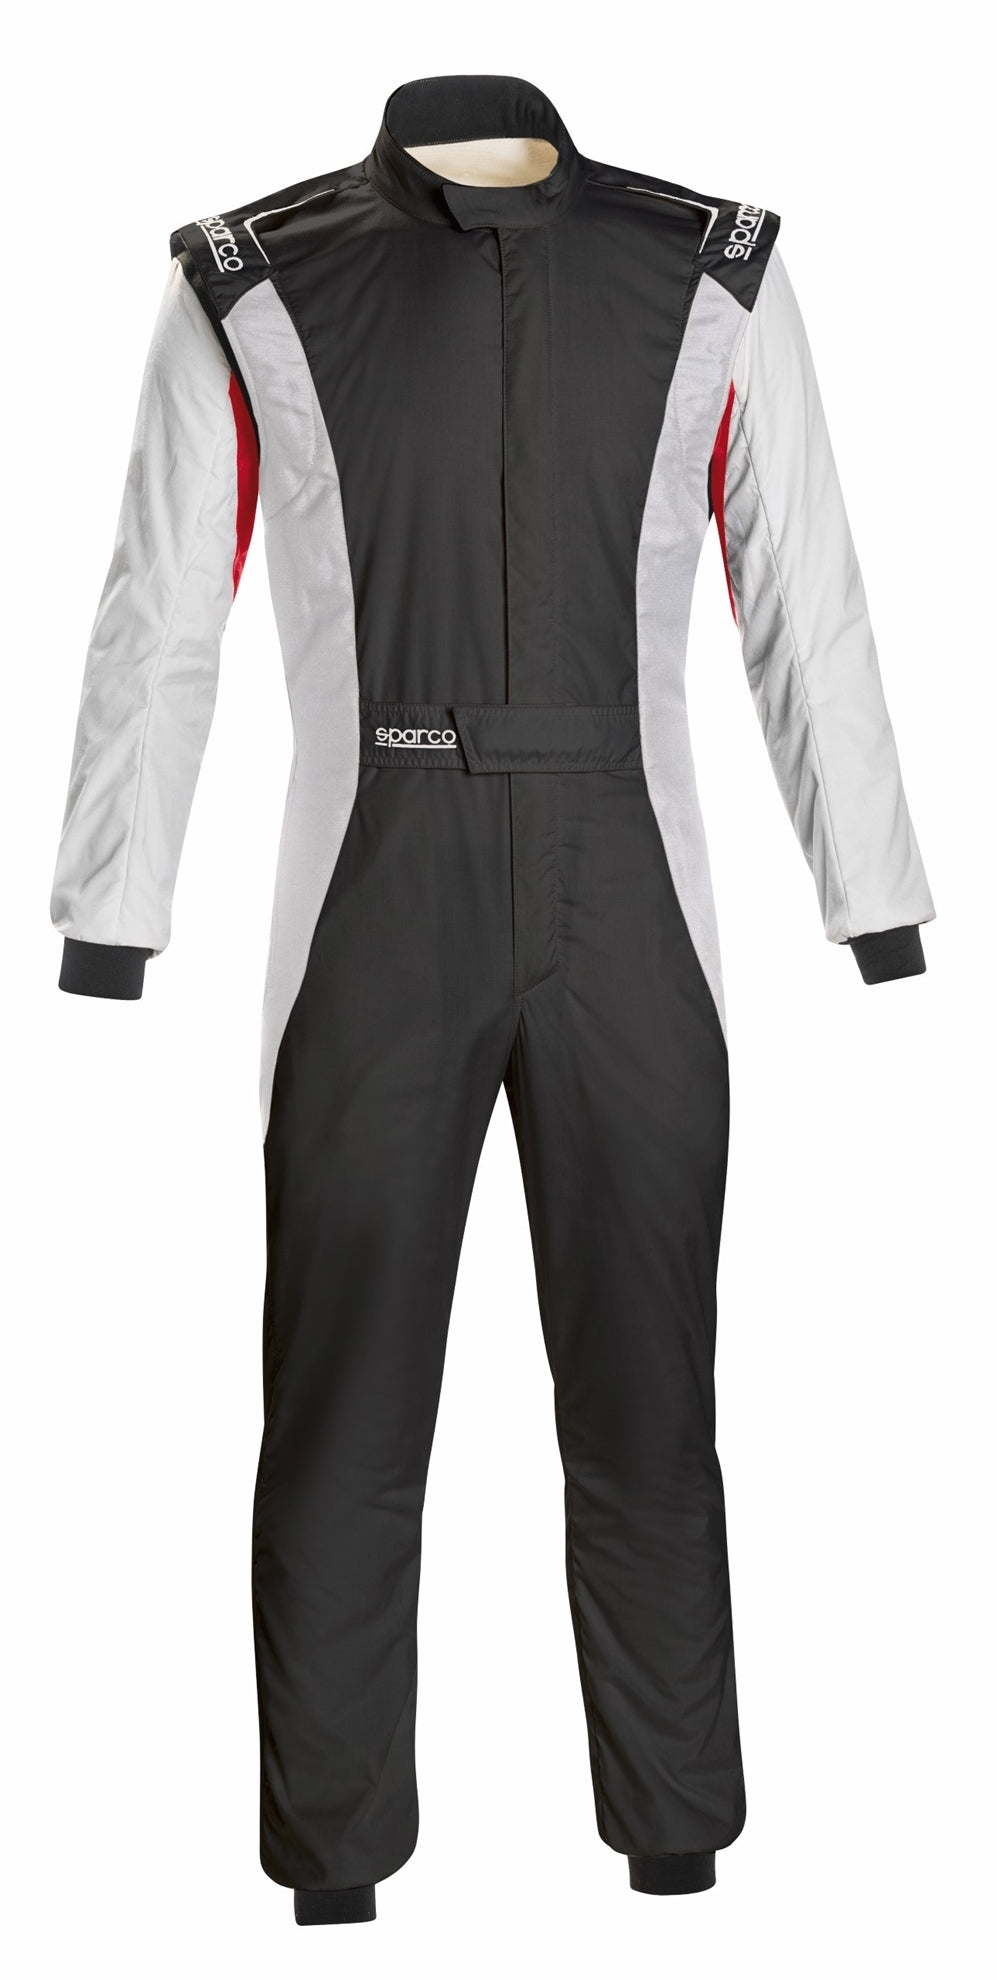 SPARCO Competition US Racing Fire Suit [SFI 3.2A/5] White/Black / Navy ...